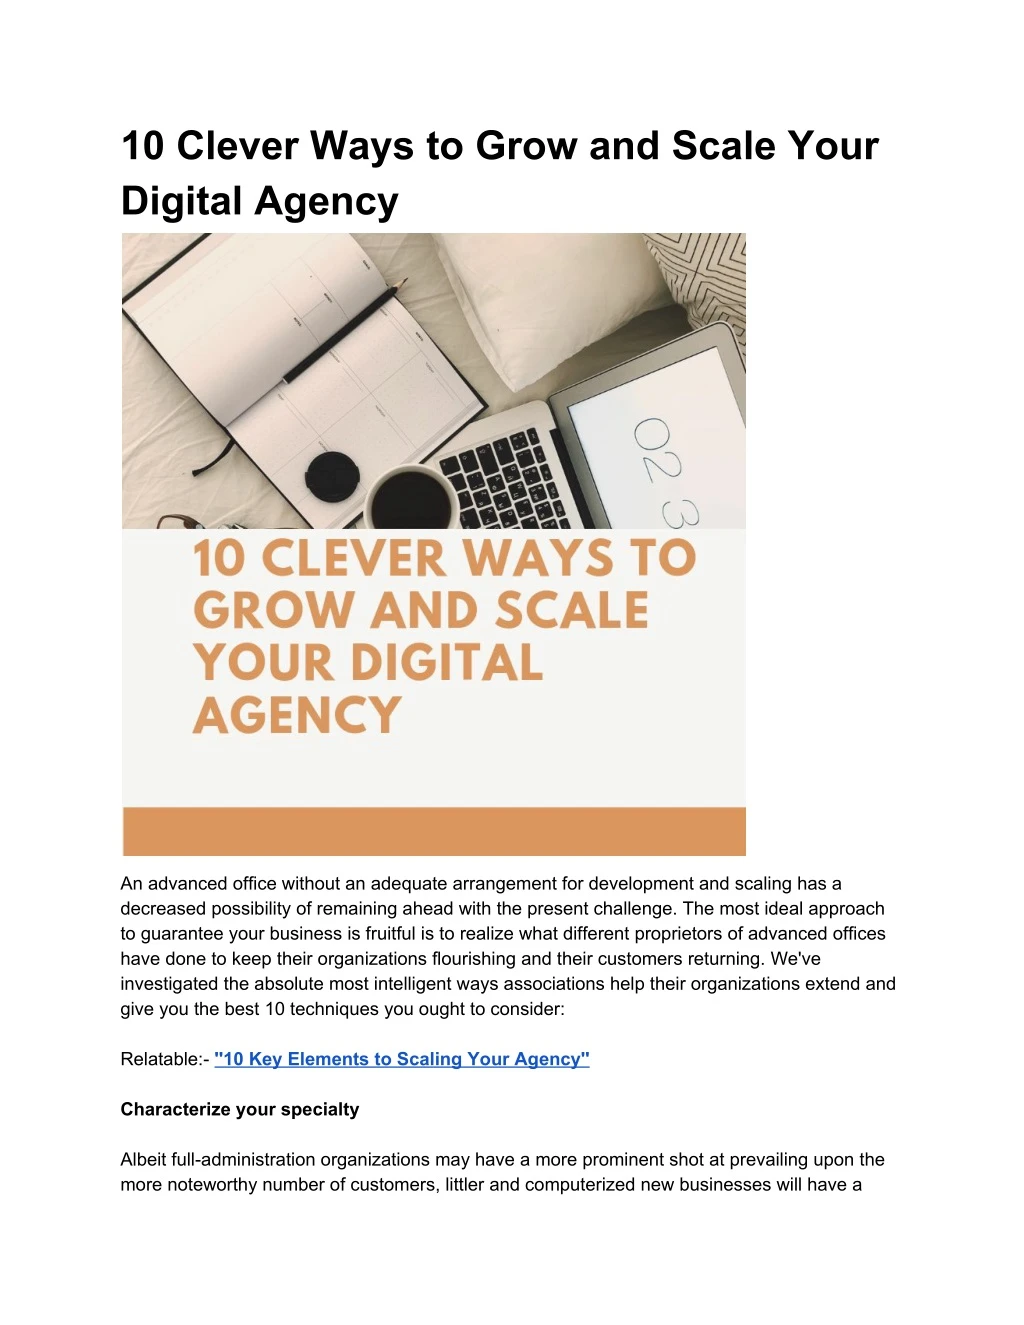 10 clever ways to grow and scale your digital